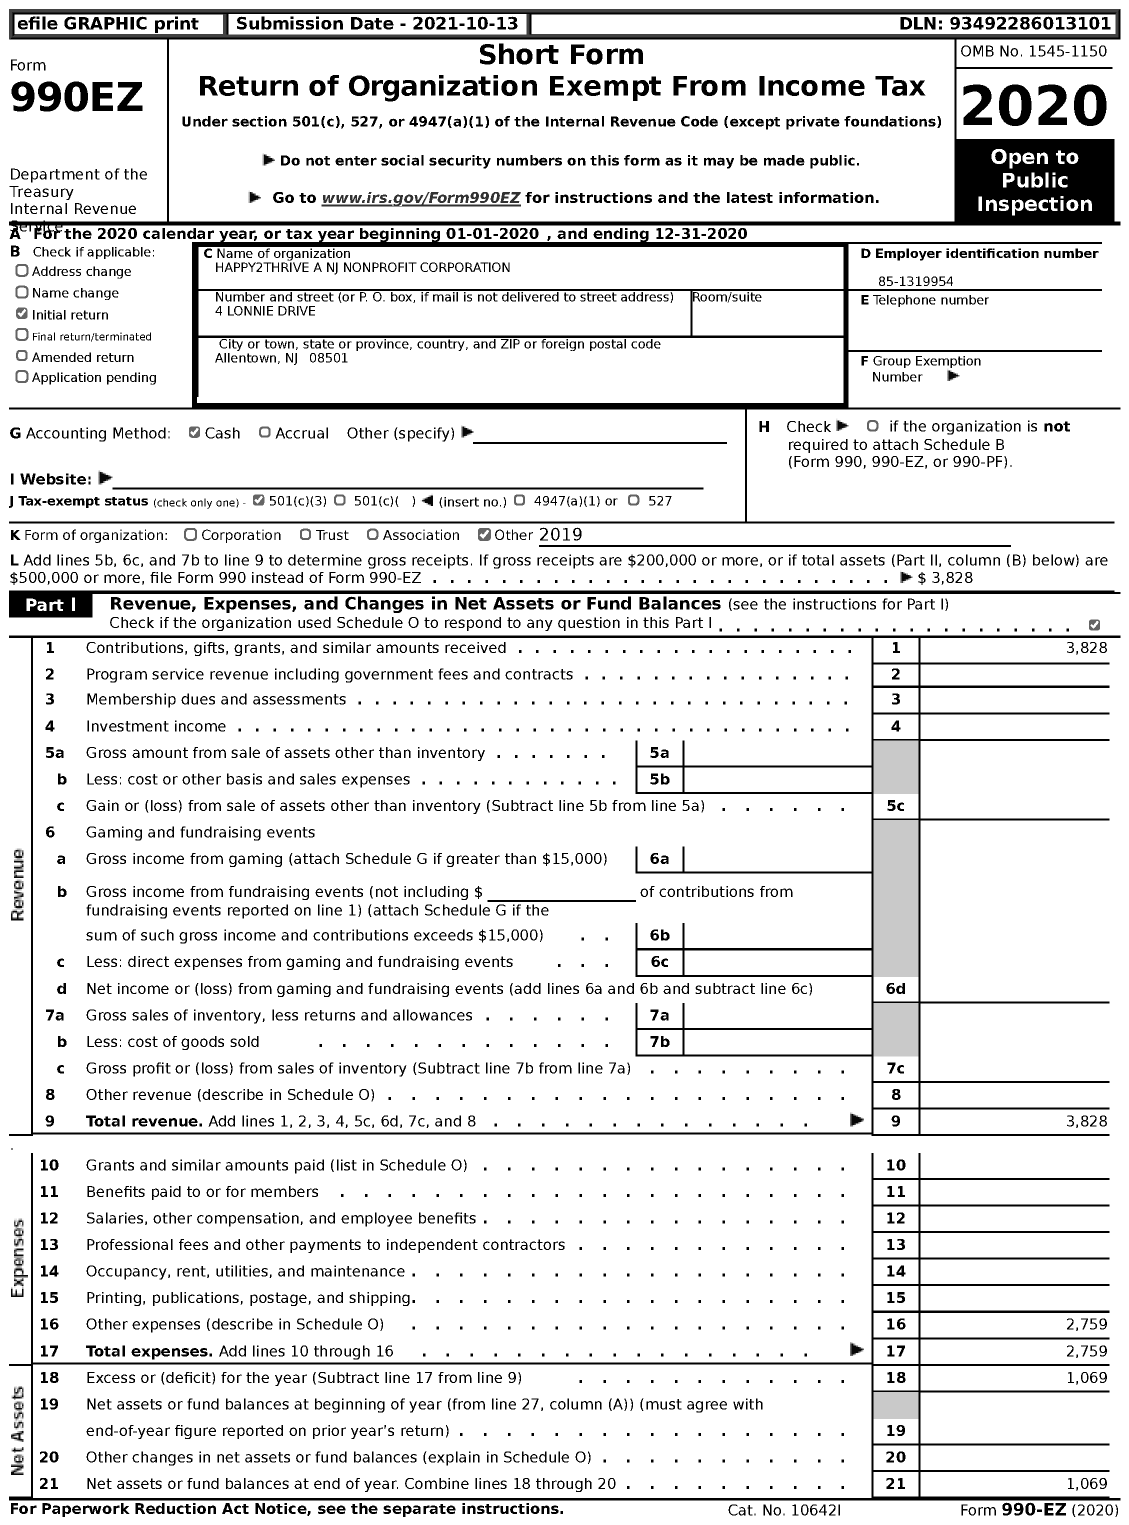 Image of first page of 2020 Form 990EZ for Happy2thrive A NJ Nonprofit Corporation